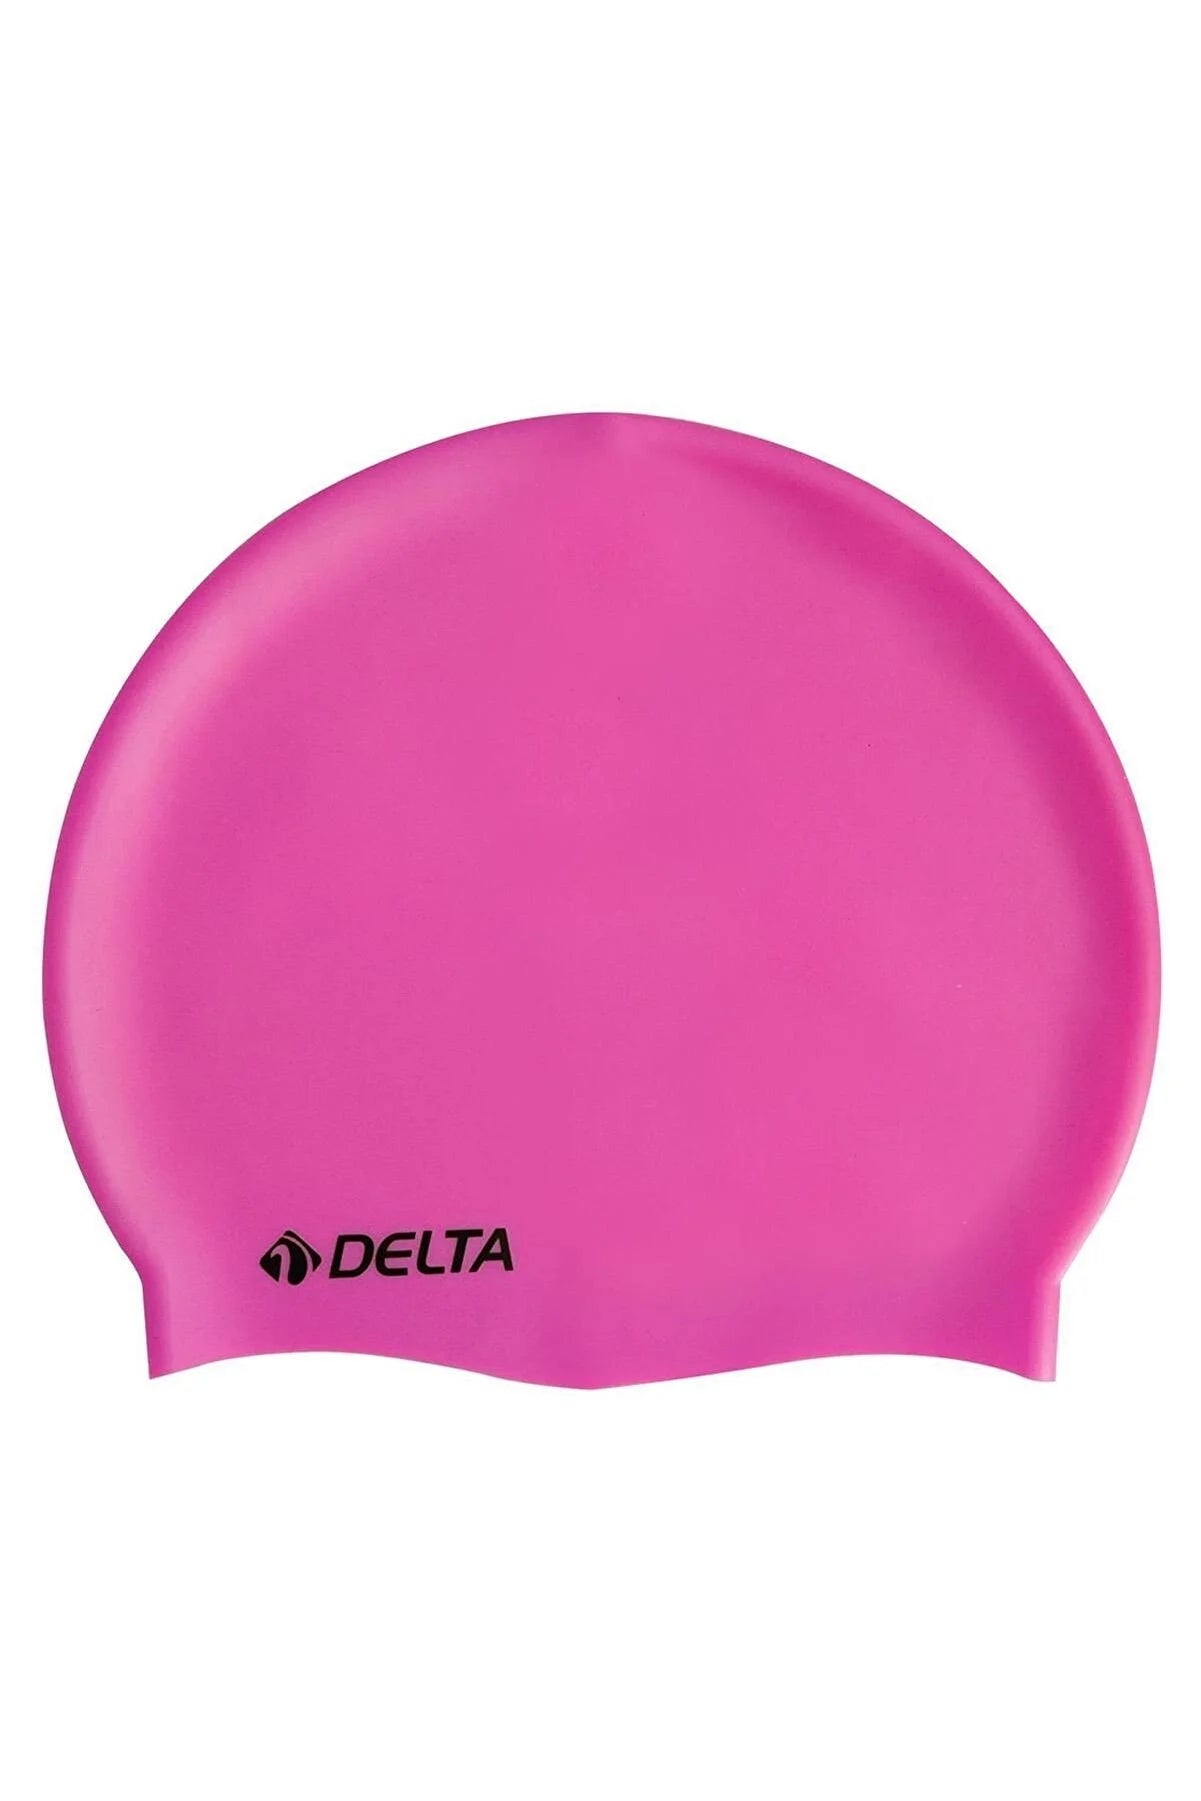 Silicone Bone Deluxe Swim Cap - Solid Pink for Pool and Sea | Ideal for Braids, Dreadlocks, and Long Hair | Includes Free Ear Plugs and PVC Storage Bag